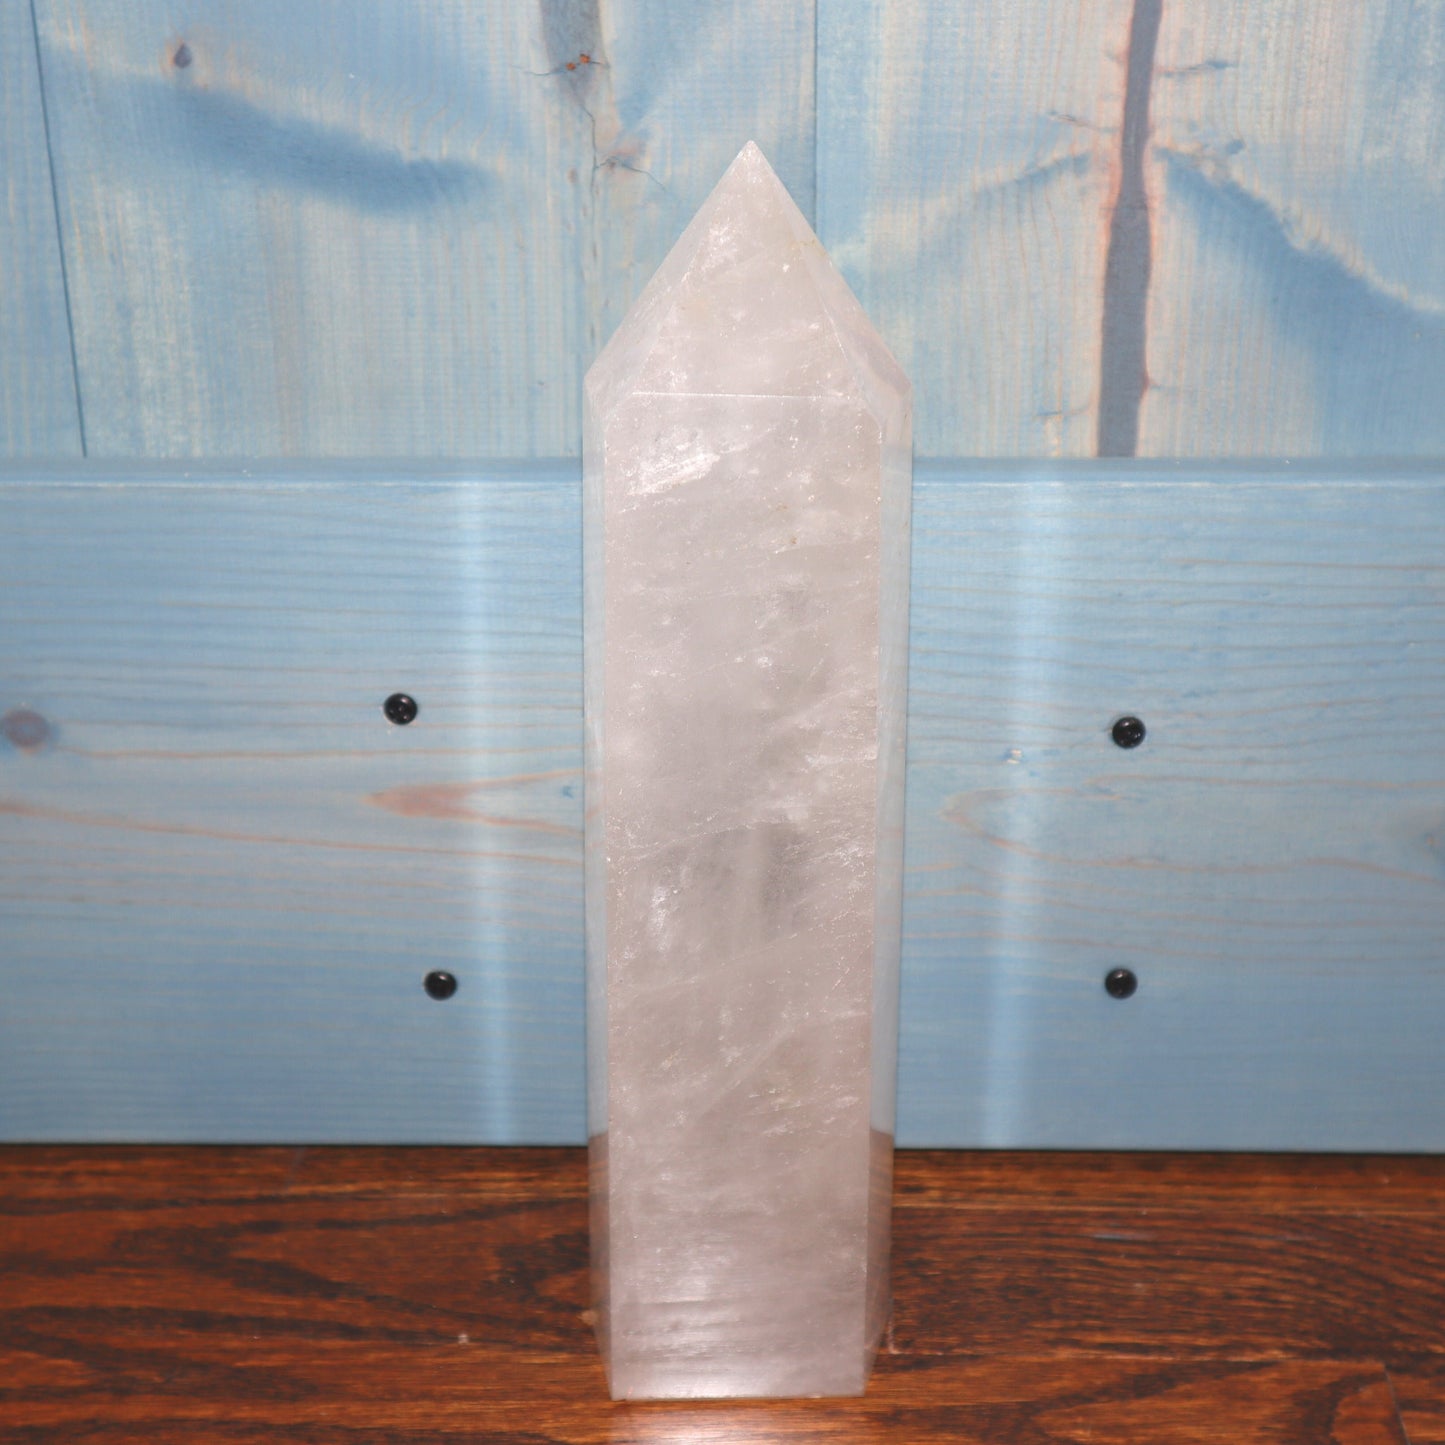 Clear Quartz Tower, Big Clear Quartz Tower, Crystal Collection, Large Crystal Obelisk, 11in Crystal Tower, Clear Quartz Wand, Natural Quartz